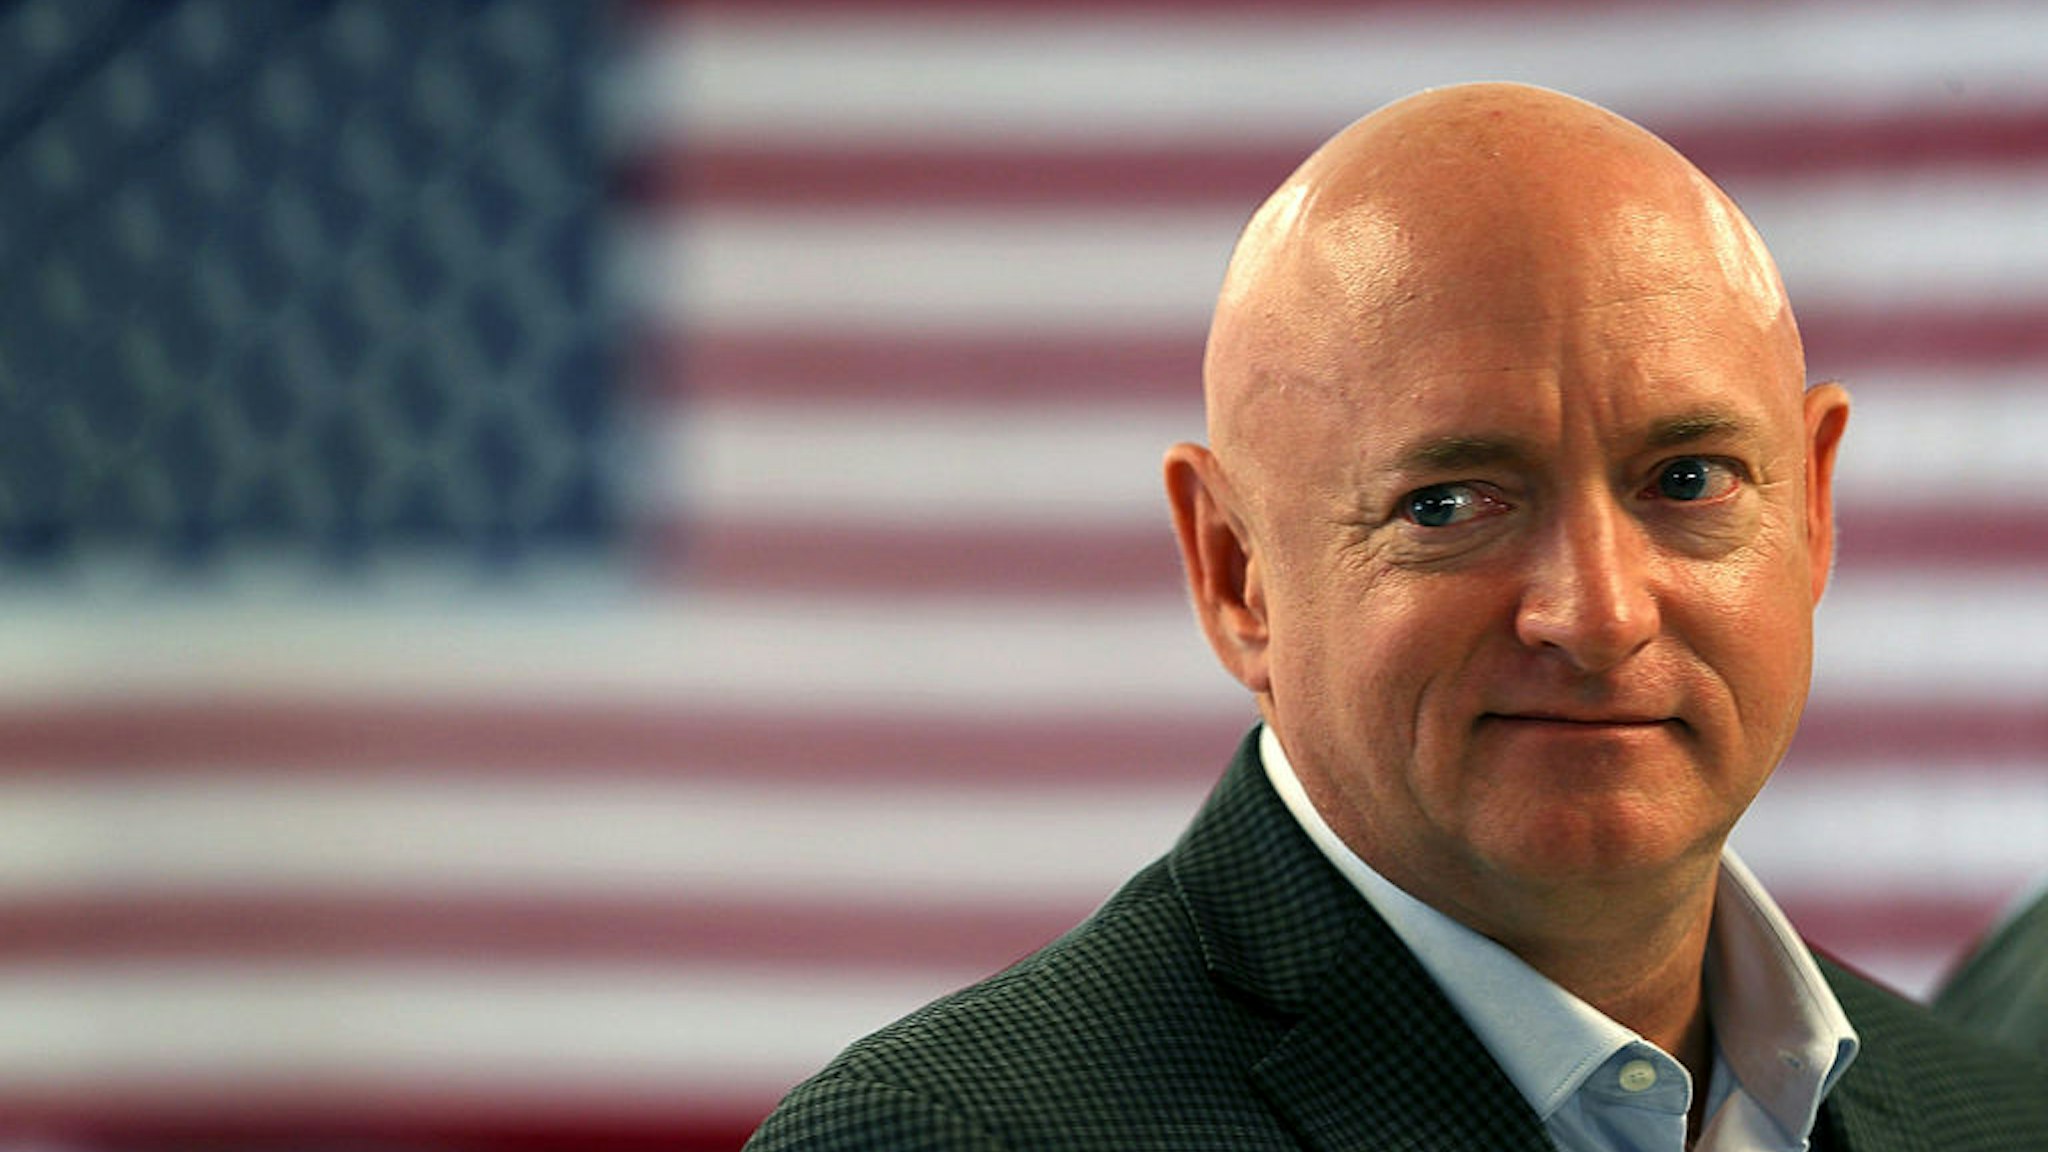 Retired NASA astronaut Mark Kelly waits to speak during a press conference where he joined his wife, former Rep. Gabrielle Giffords, and other anti-gun violence activists and victims' families to discuss the impact of gun violence on August 12, 2016 in Miami, Florida.